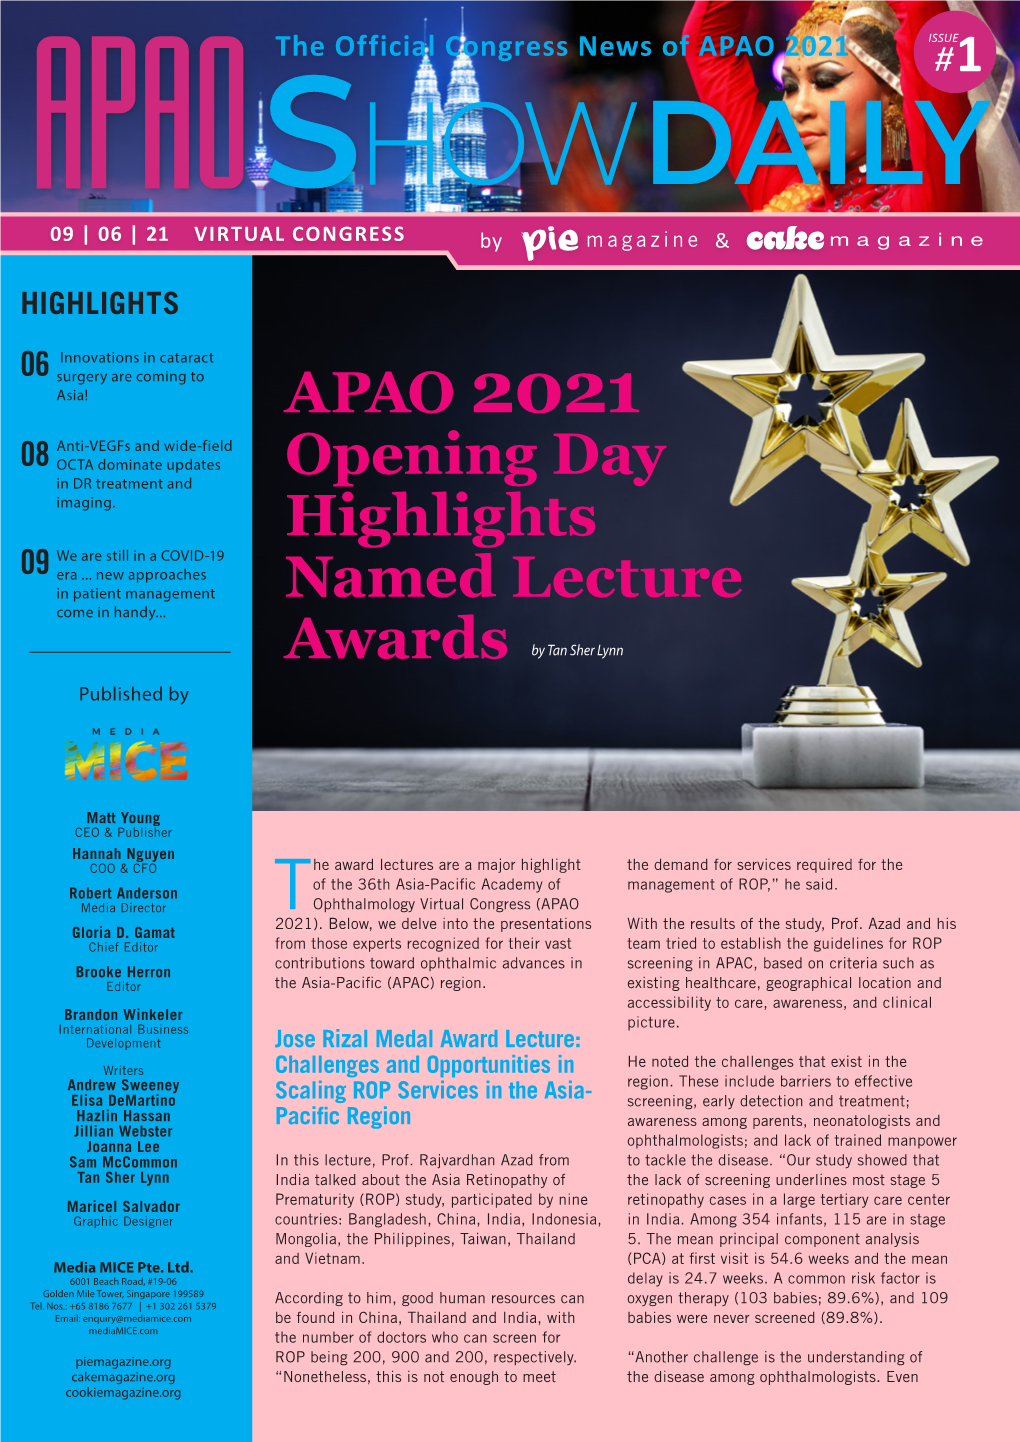 APAO 2021 Opening Day Highlights Named Lecture